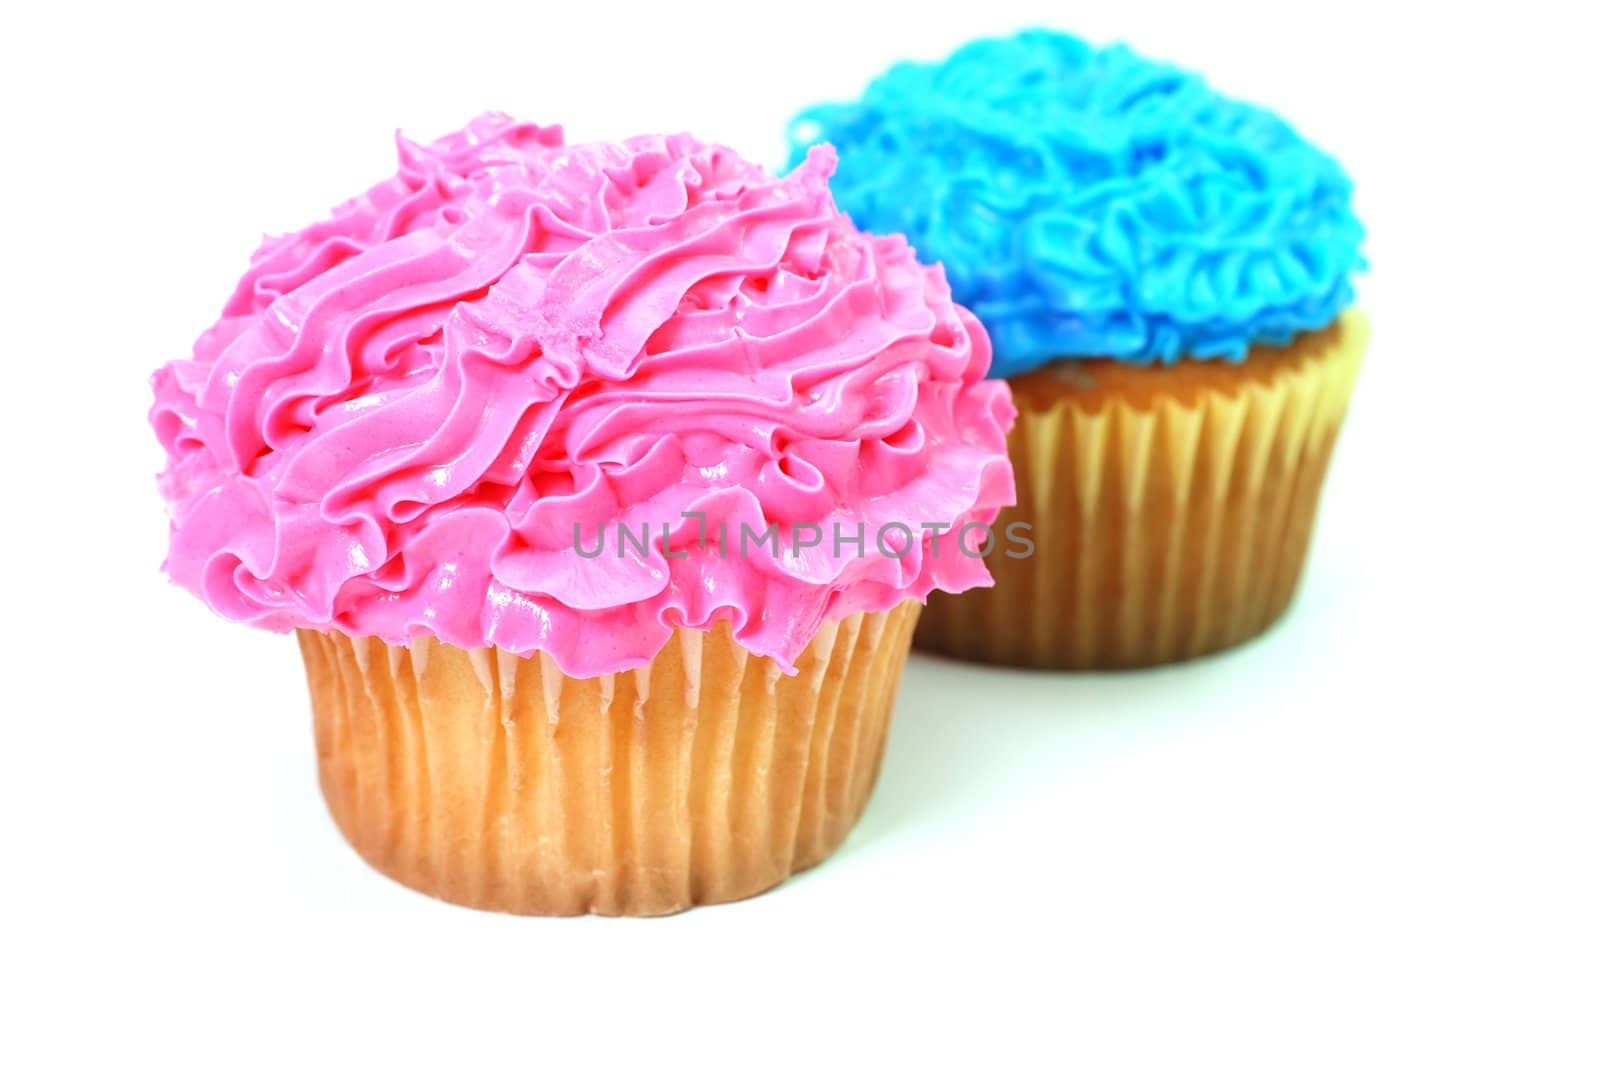 Pink and blue cupcakes with decorative frosting.  Isolated on white background.